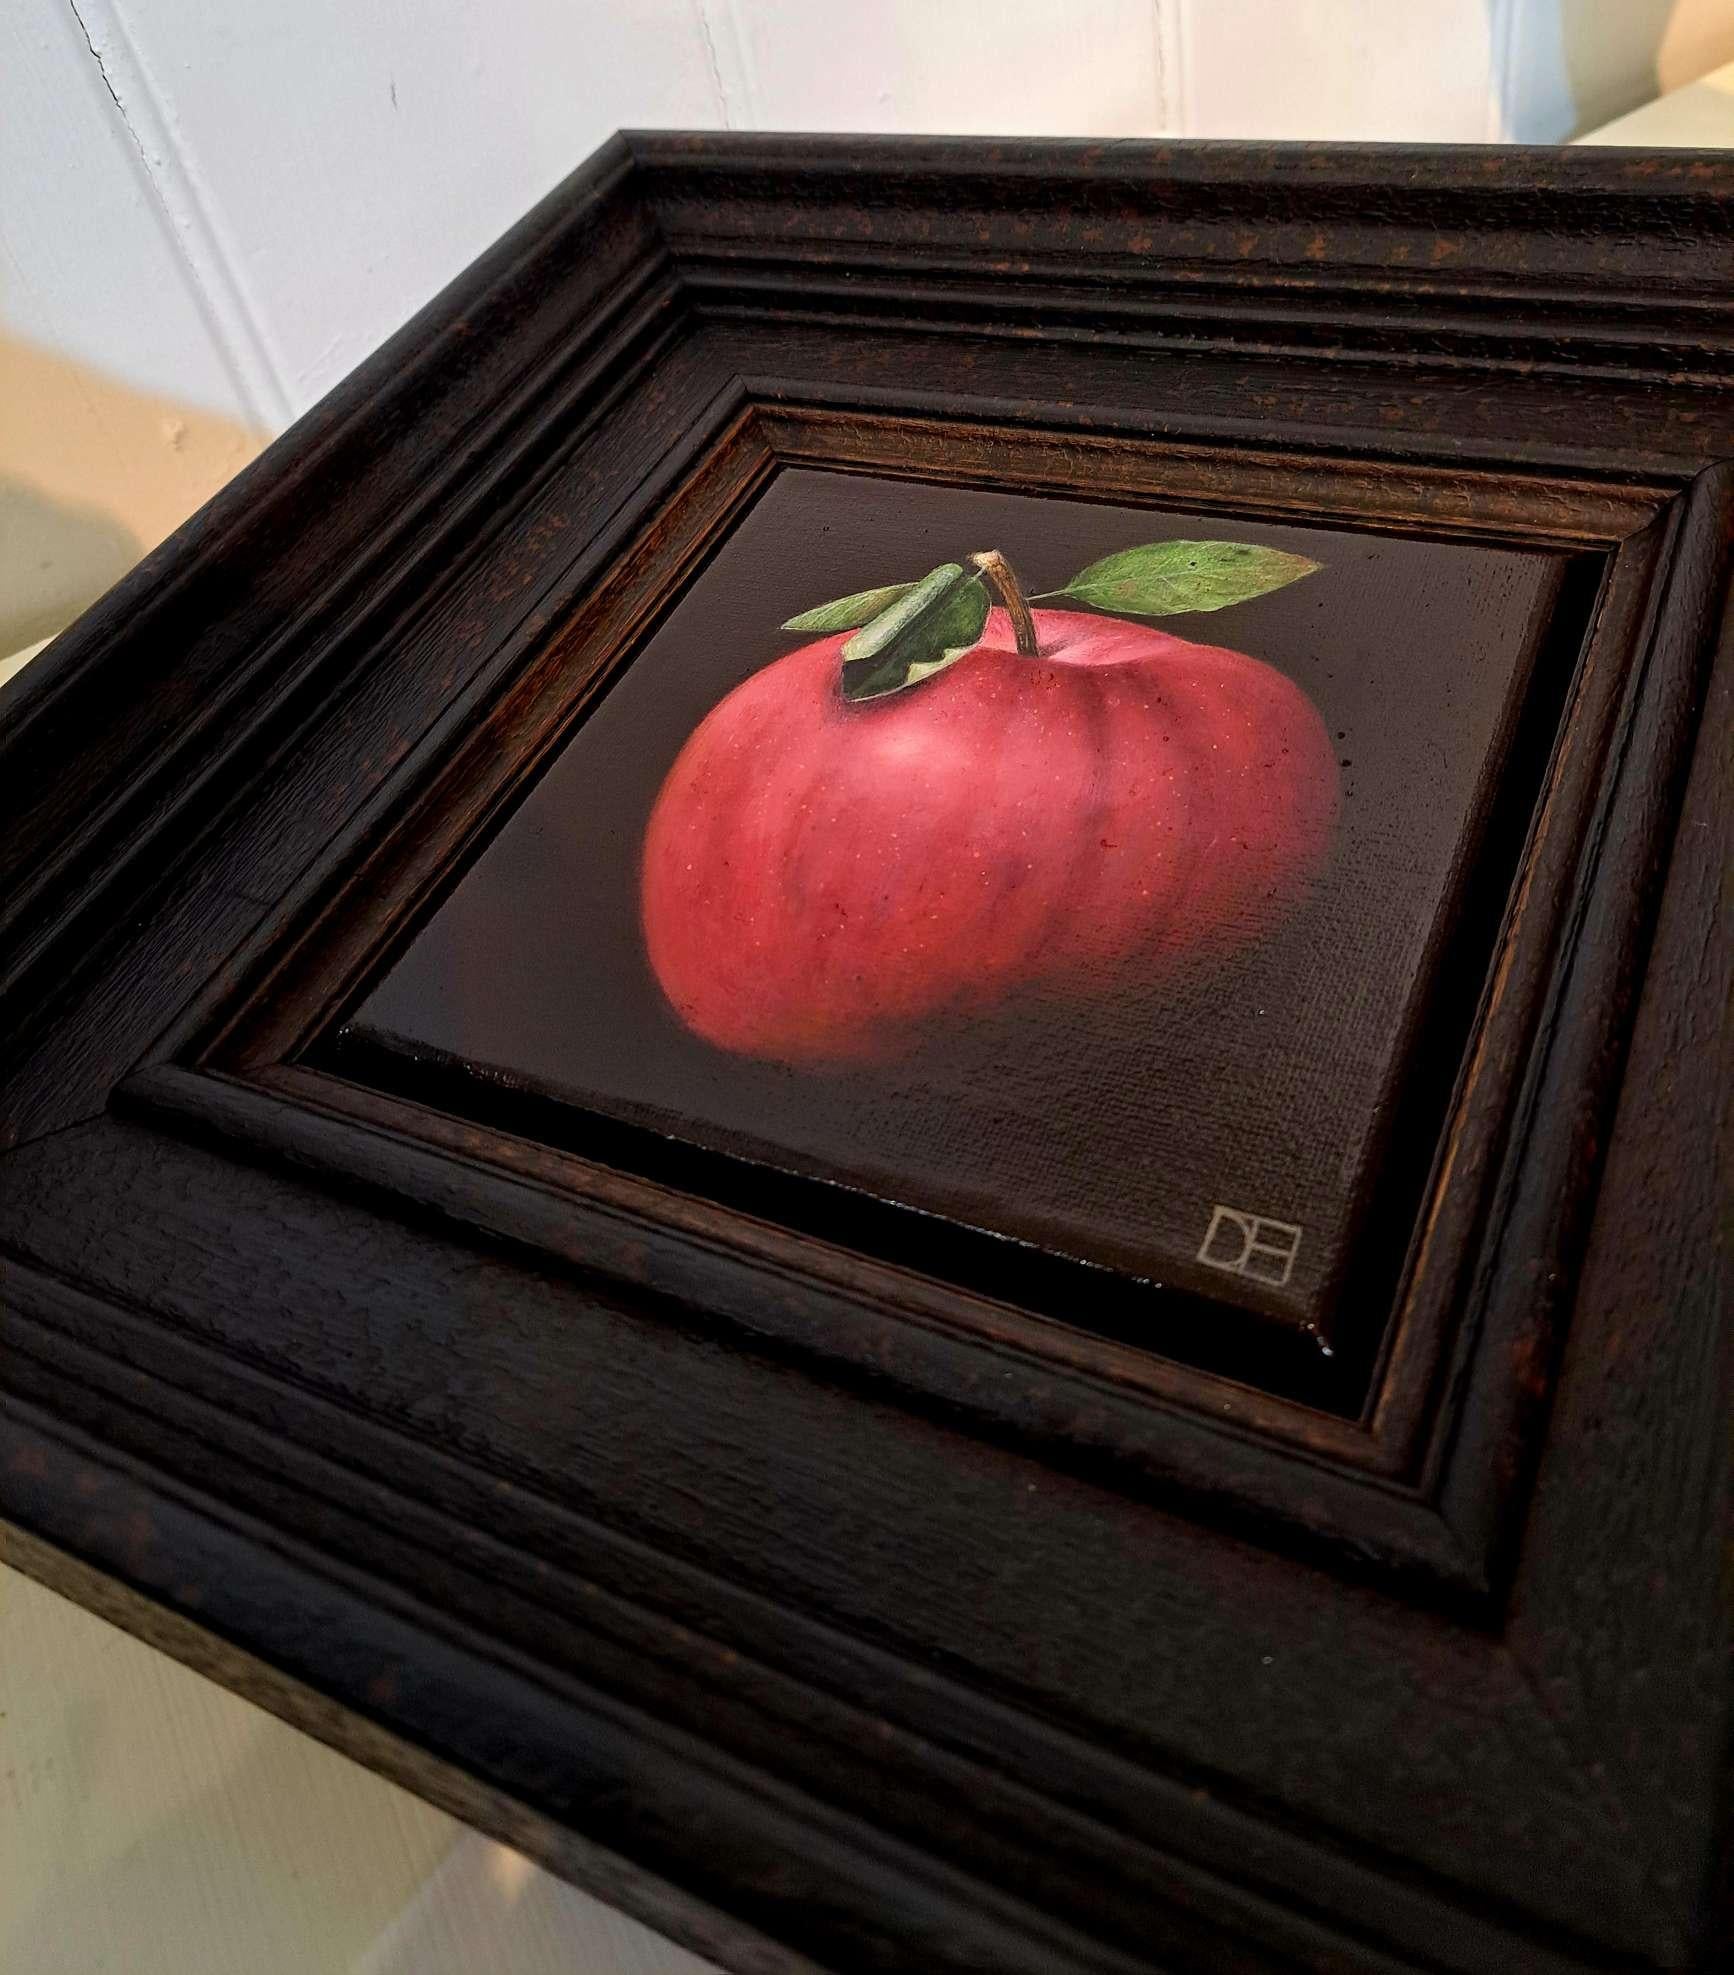 Very Shiny Very Red Apple is an original oil painting by Dani Humberstone as part of her series of realistic oil paintings of fruit with a nod to baroque still life painting. The paintings are set in a heavy black wood layered frame.

ADDITIONAL